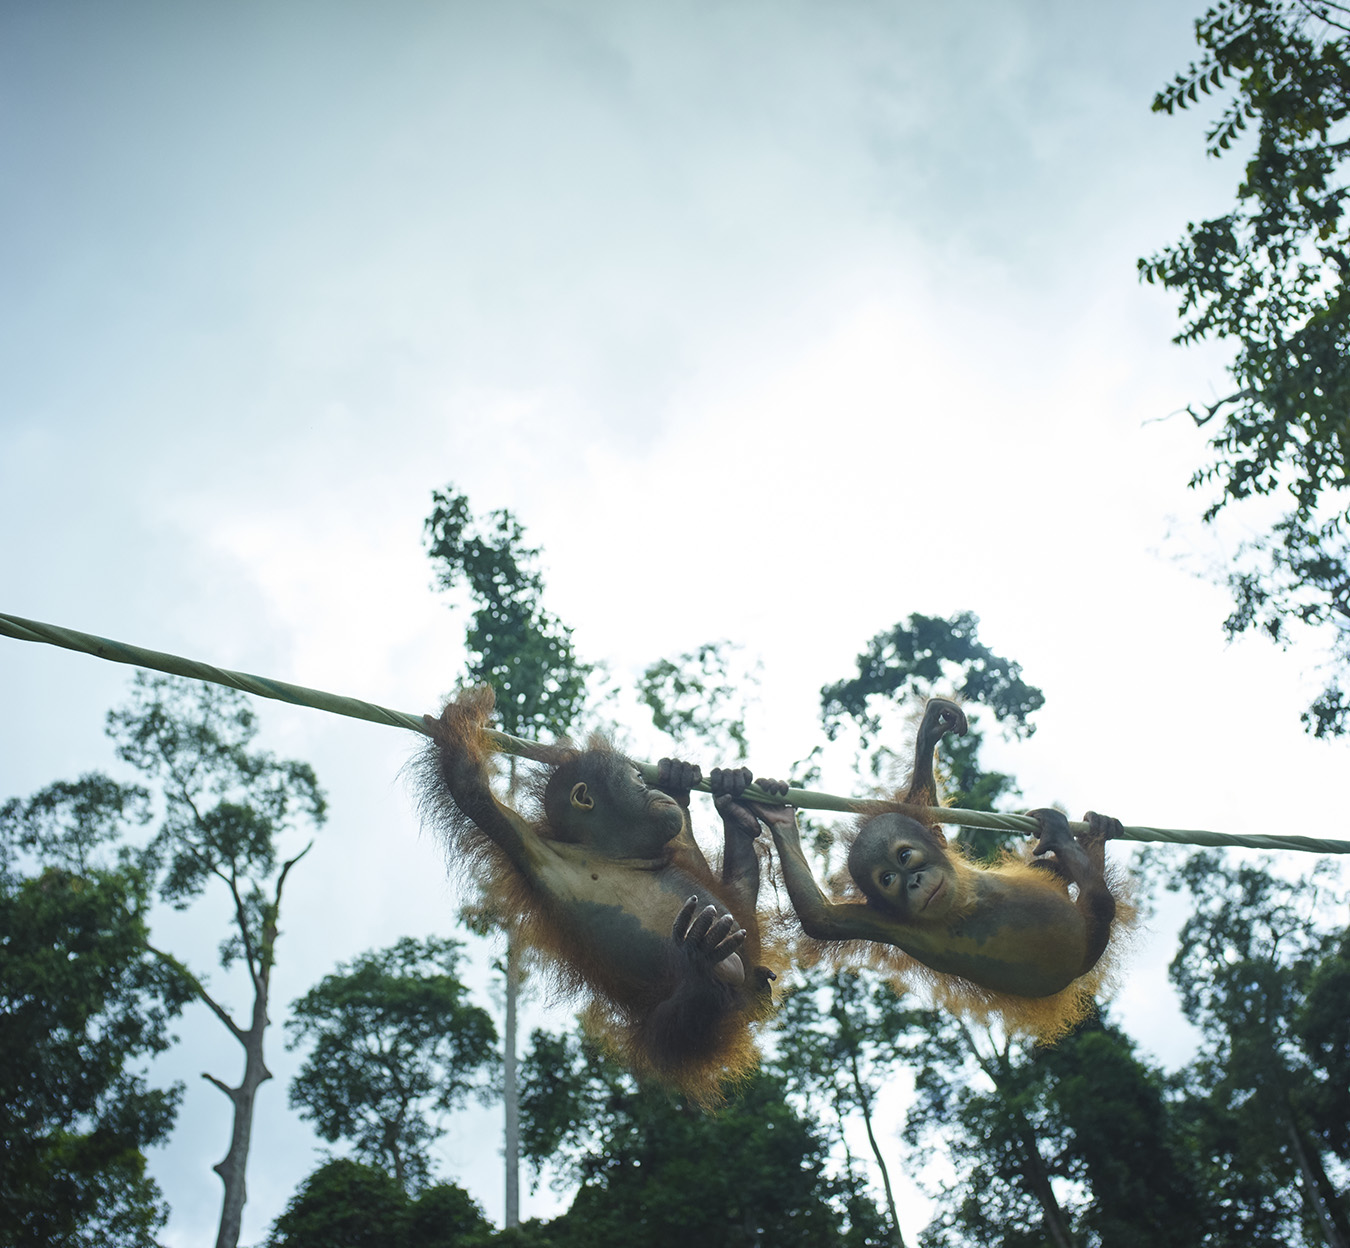 A photograph of orphaned orangutans crossing a tightrope taken on Borneo Island.